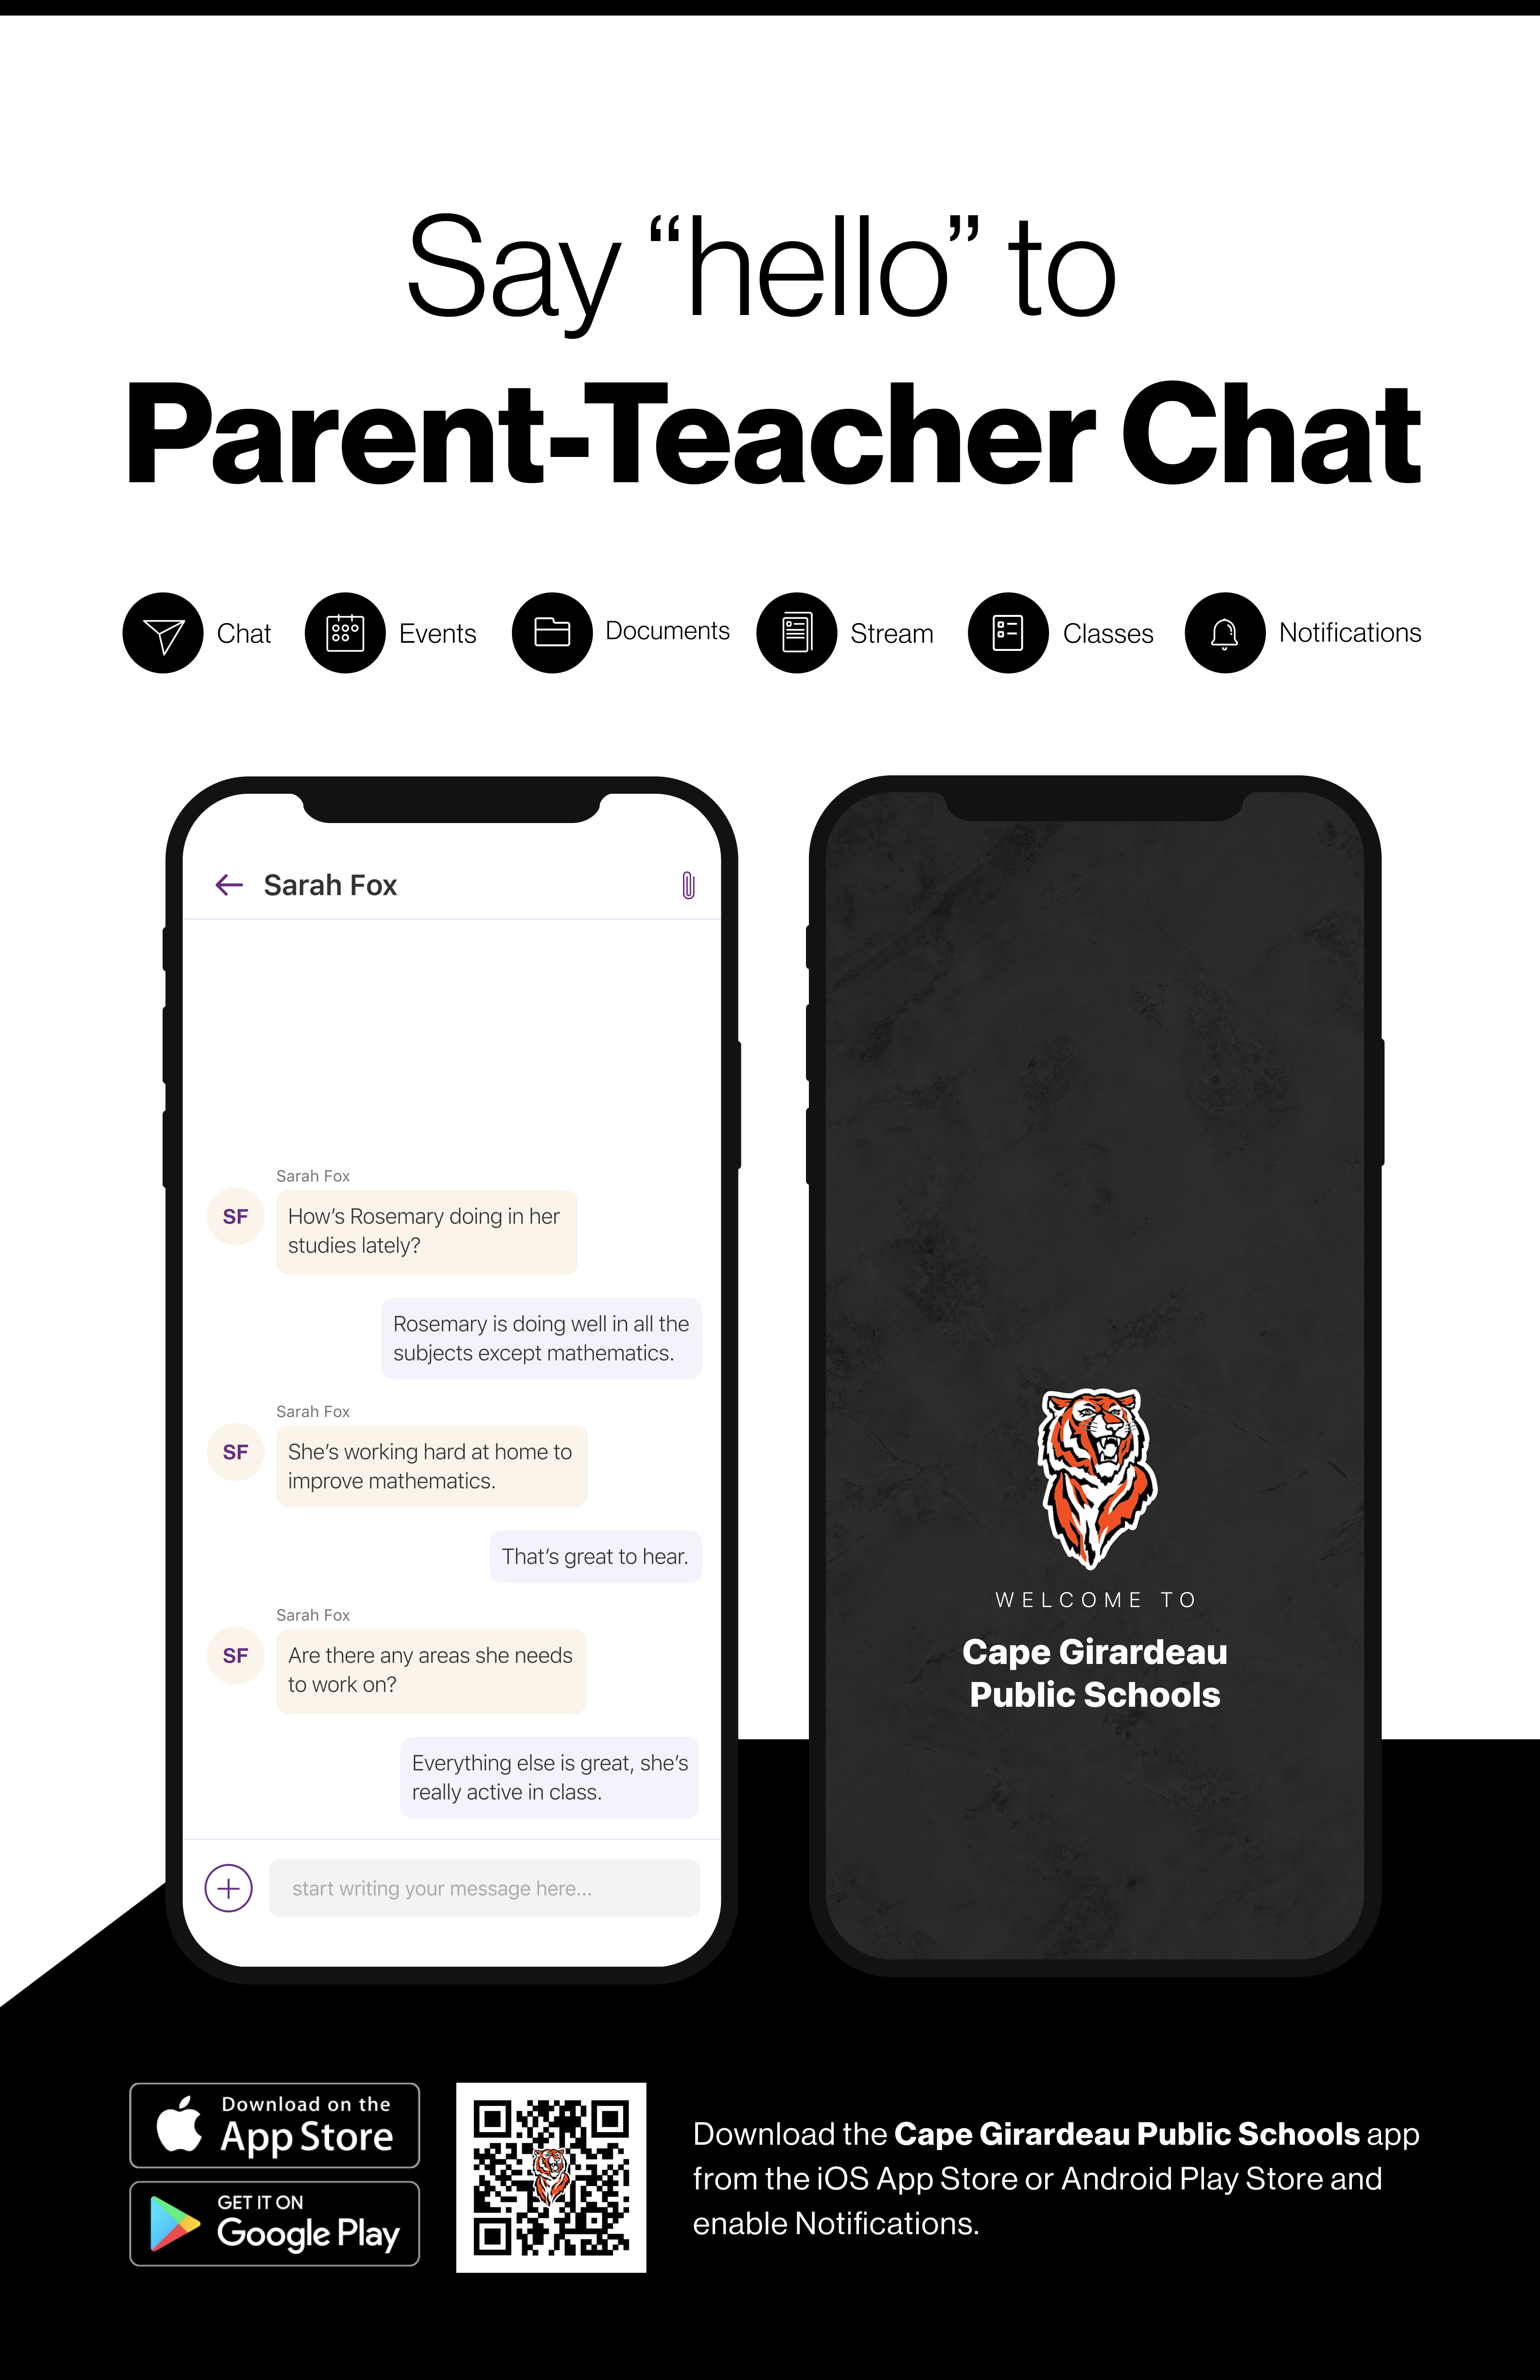 Say hello to Parent-Teacher chat in the new Rooms app. Download the Cape Girardeau Public Schools app in the Google Play or Apple App store.